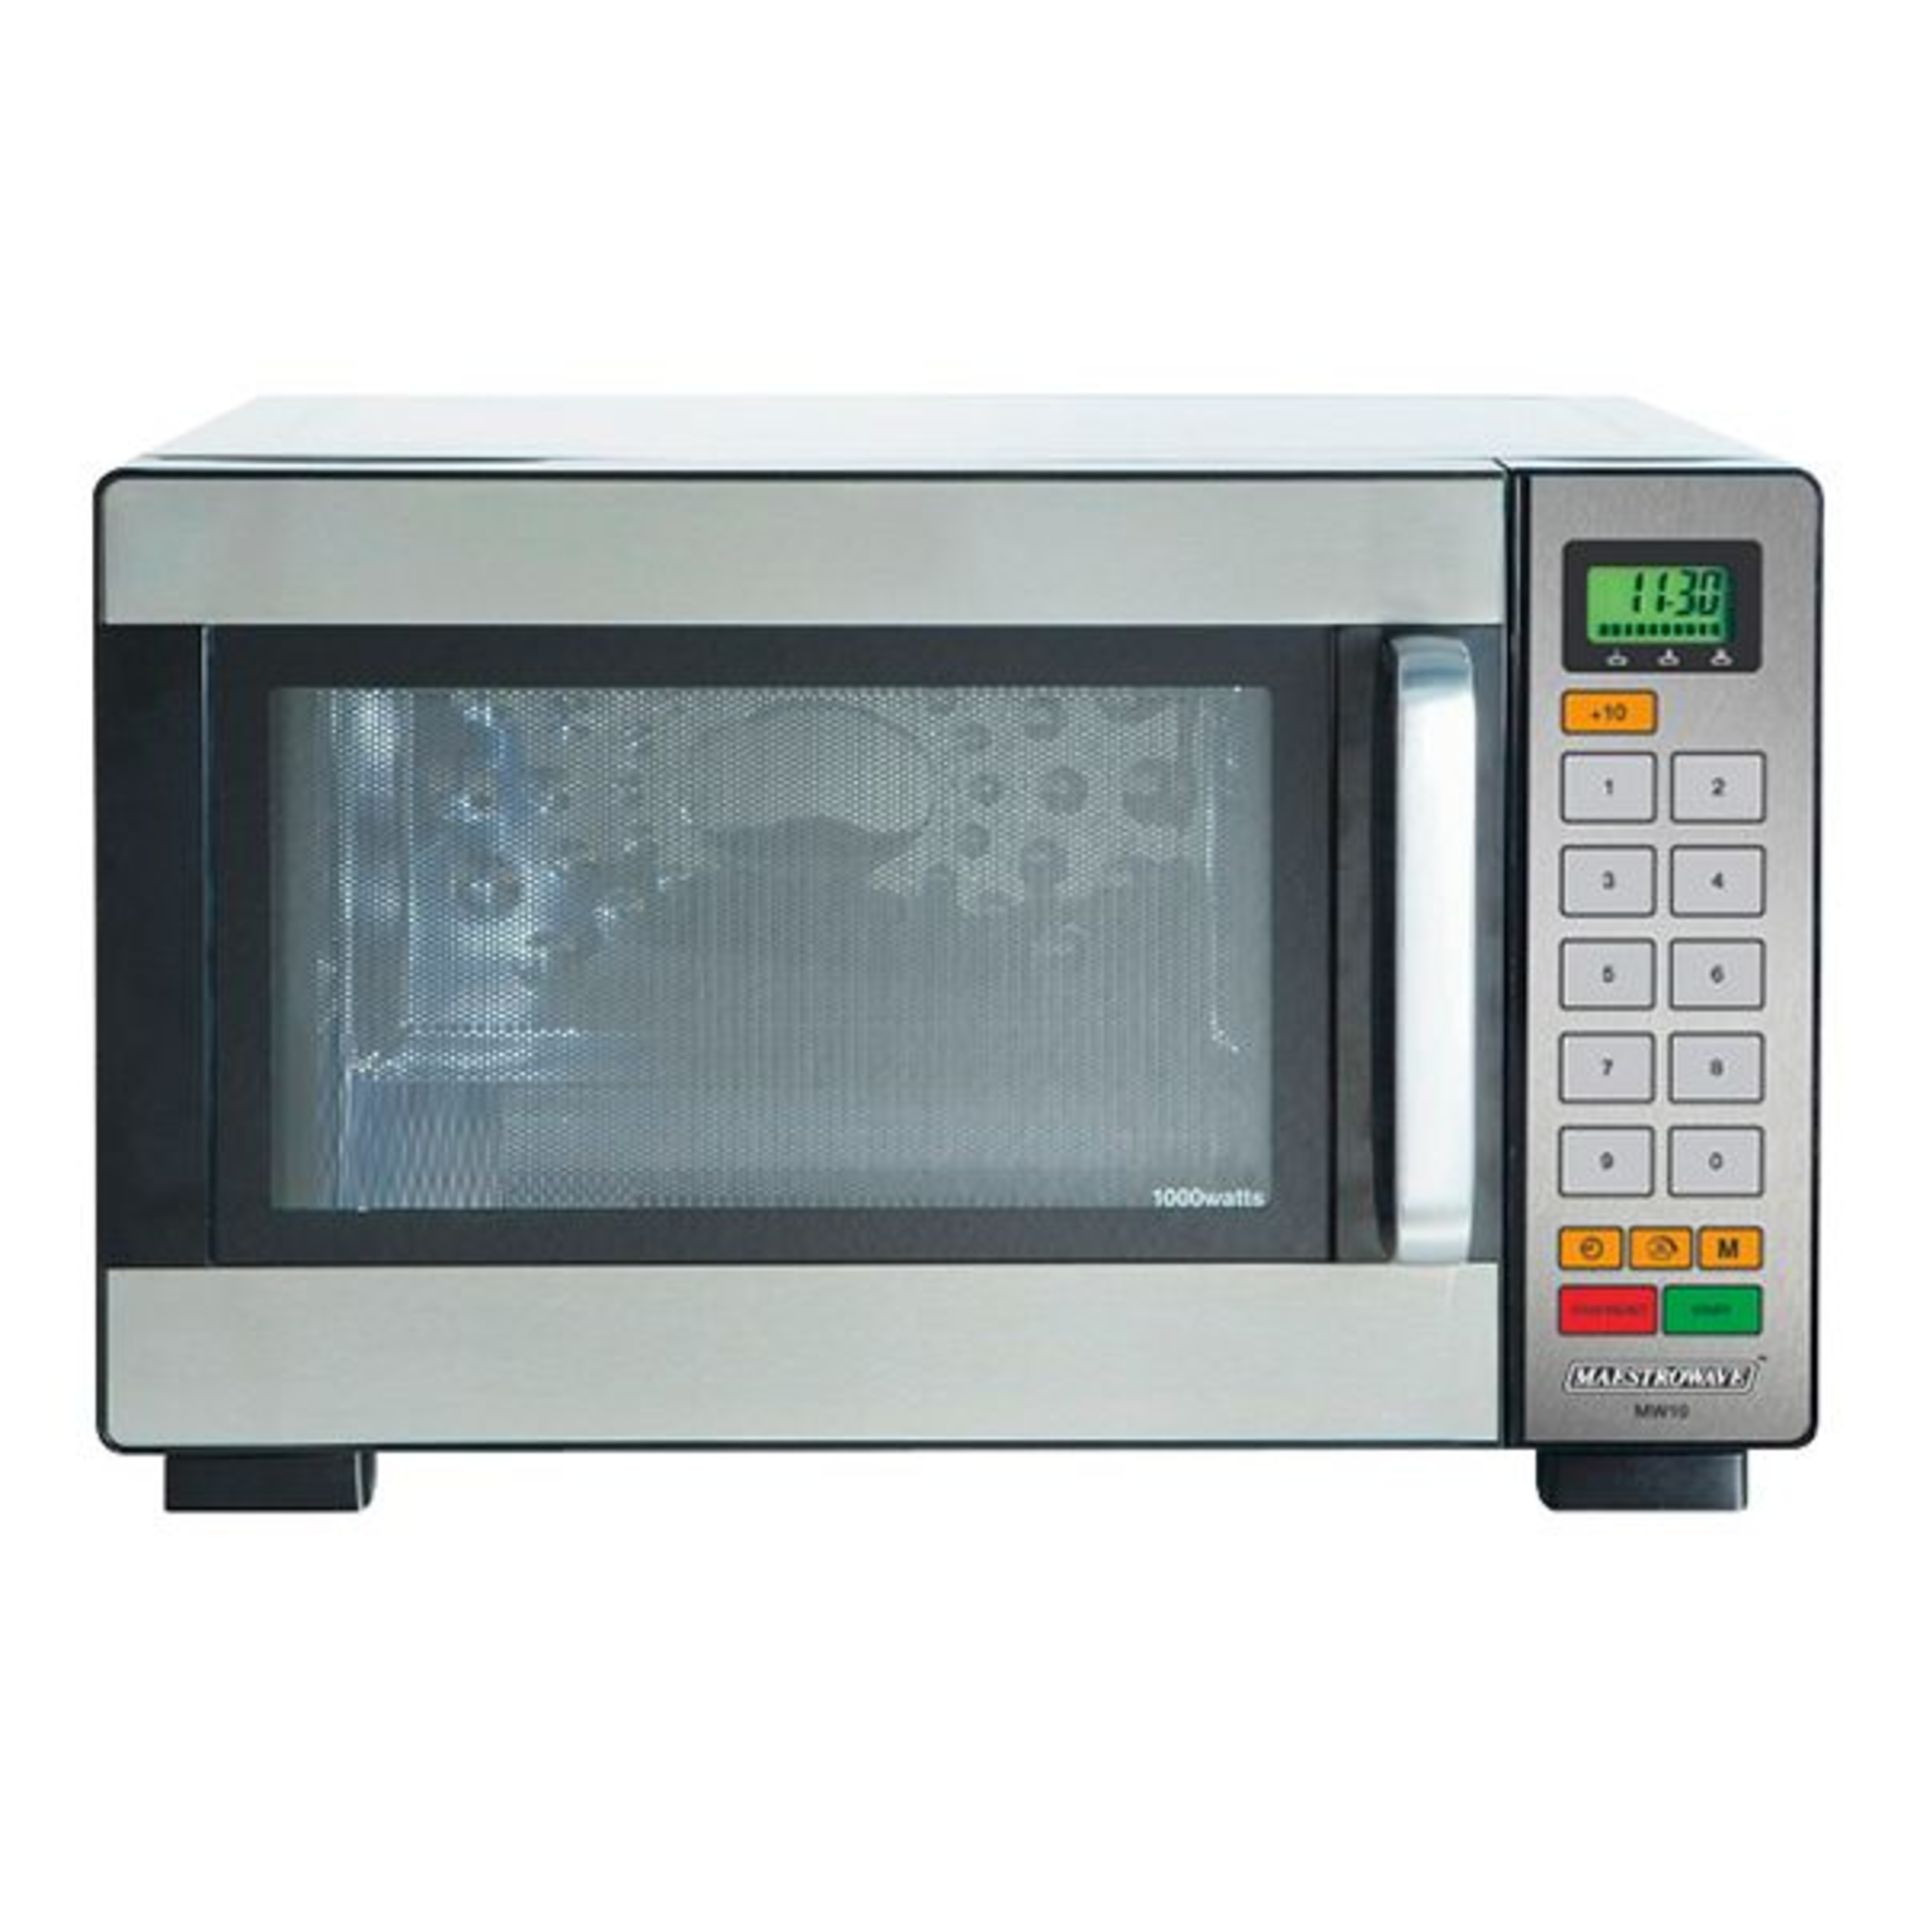 BOXED MAESTROWAVE STAINLESS STEEL COMMERCIAL MICROWAVE, MODEL- MW10, RRP-£200.00Condition Report